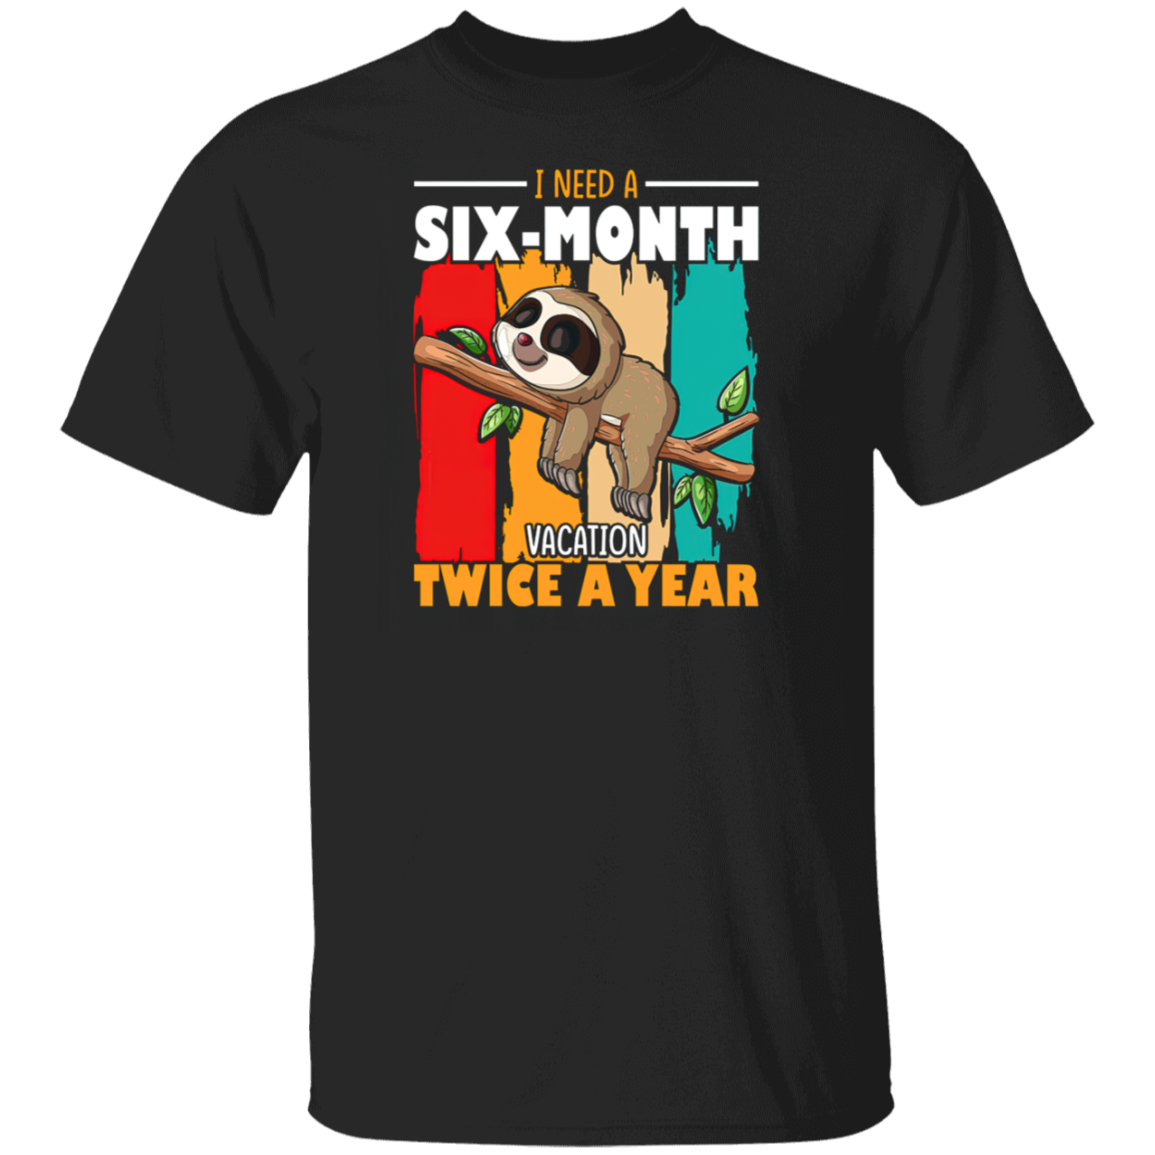 I Need A 6 Month Vacation T-Shirt